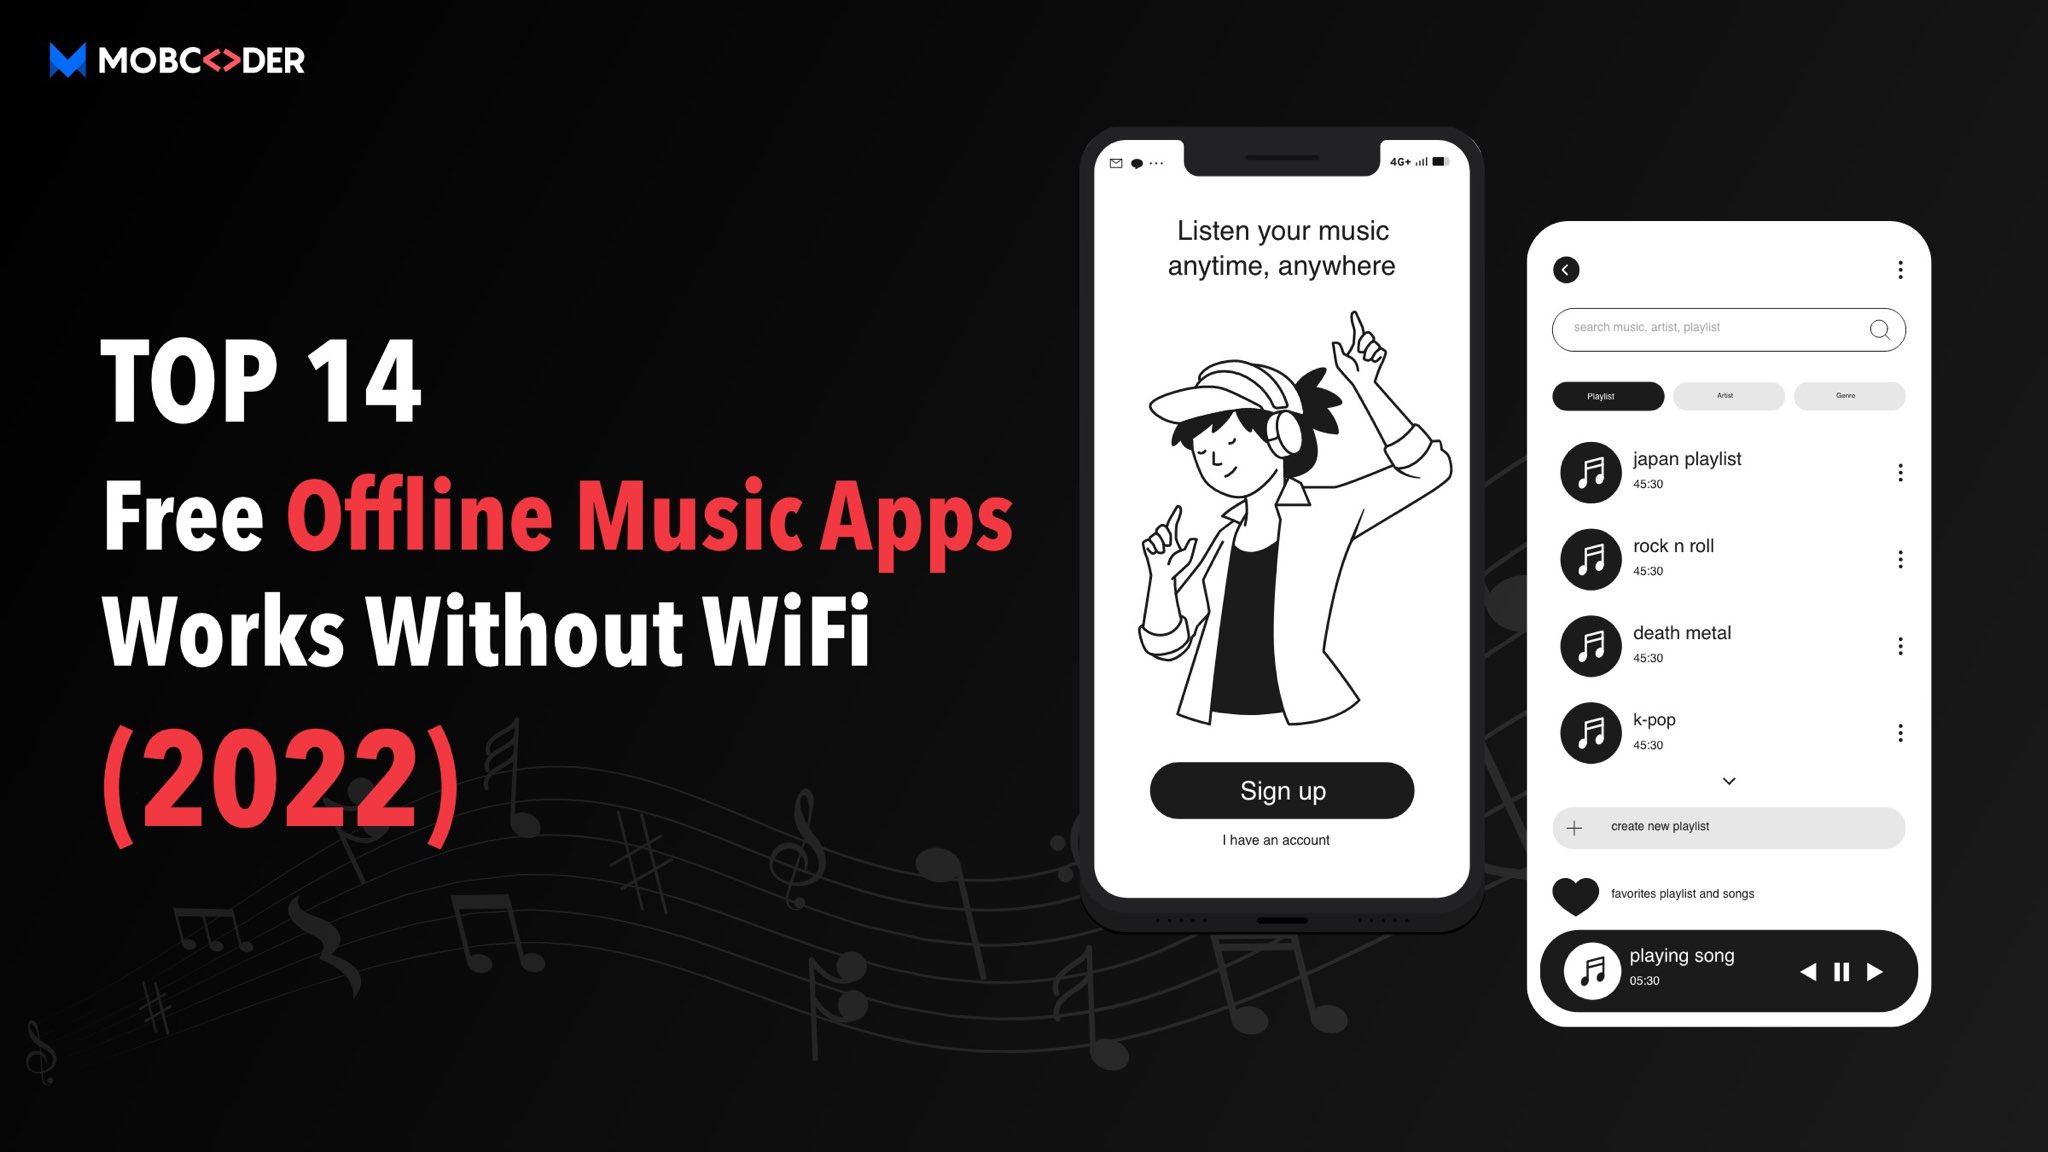 Top 14 Free Offline Music Apps Works Without WiFi (2022)